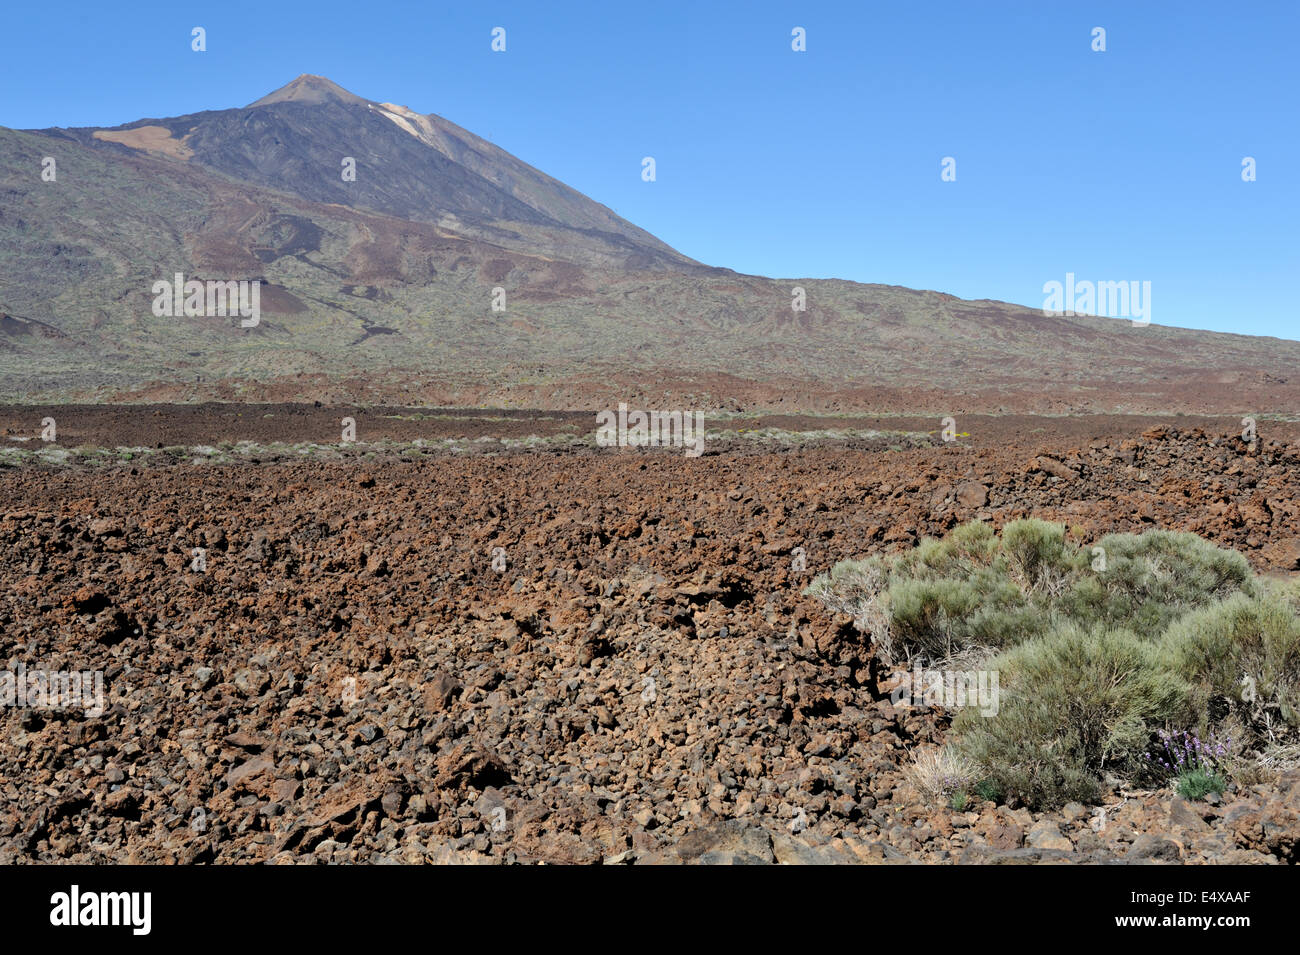 Mount Teide volcano in national park with lava flow in foreground, Tenerife Stock Photo